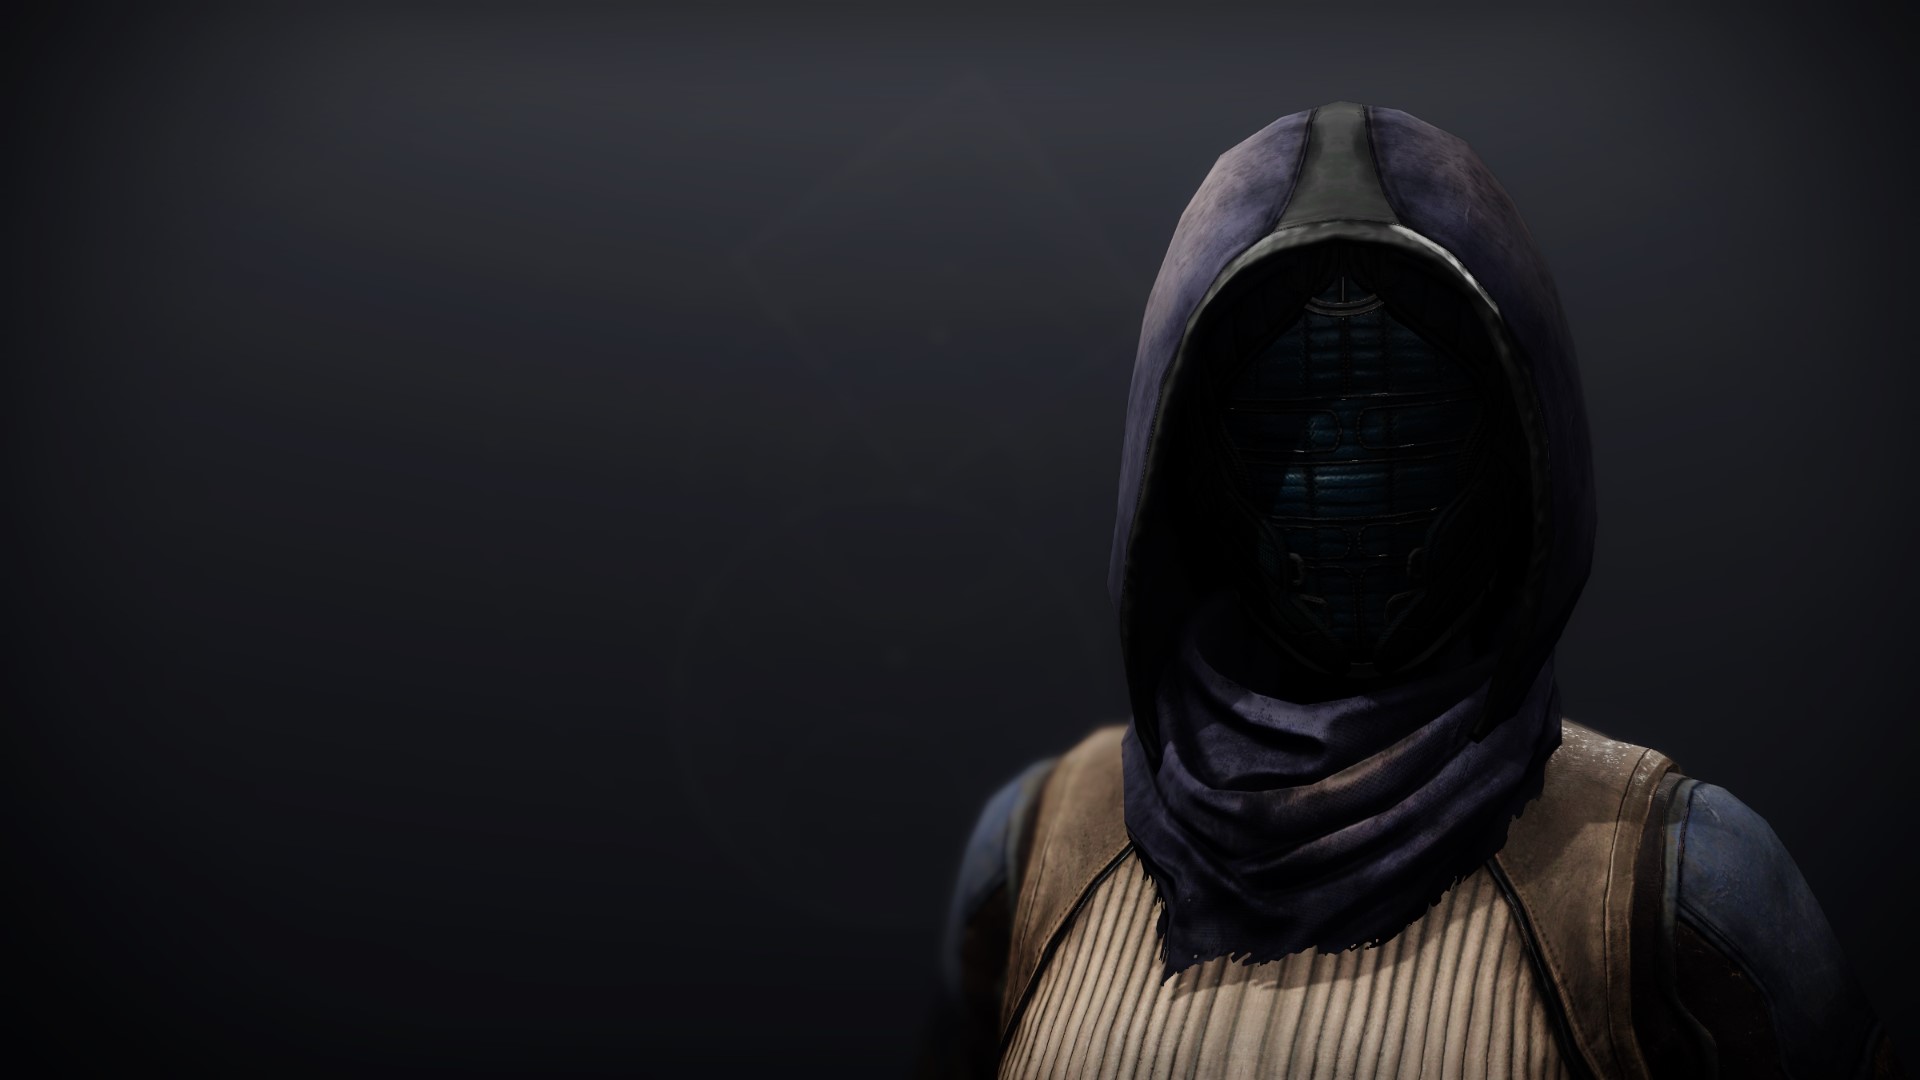 An in-game render of the Praefectus Mask.